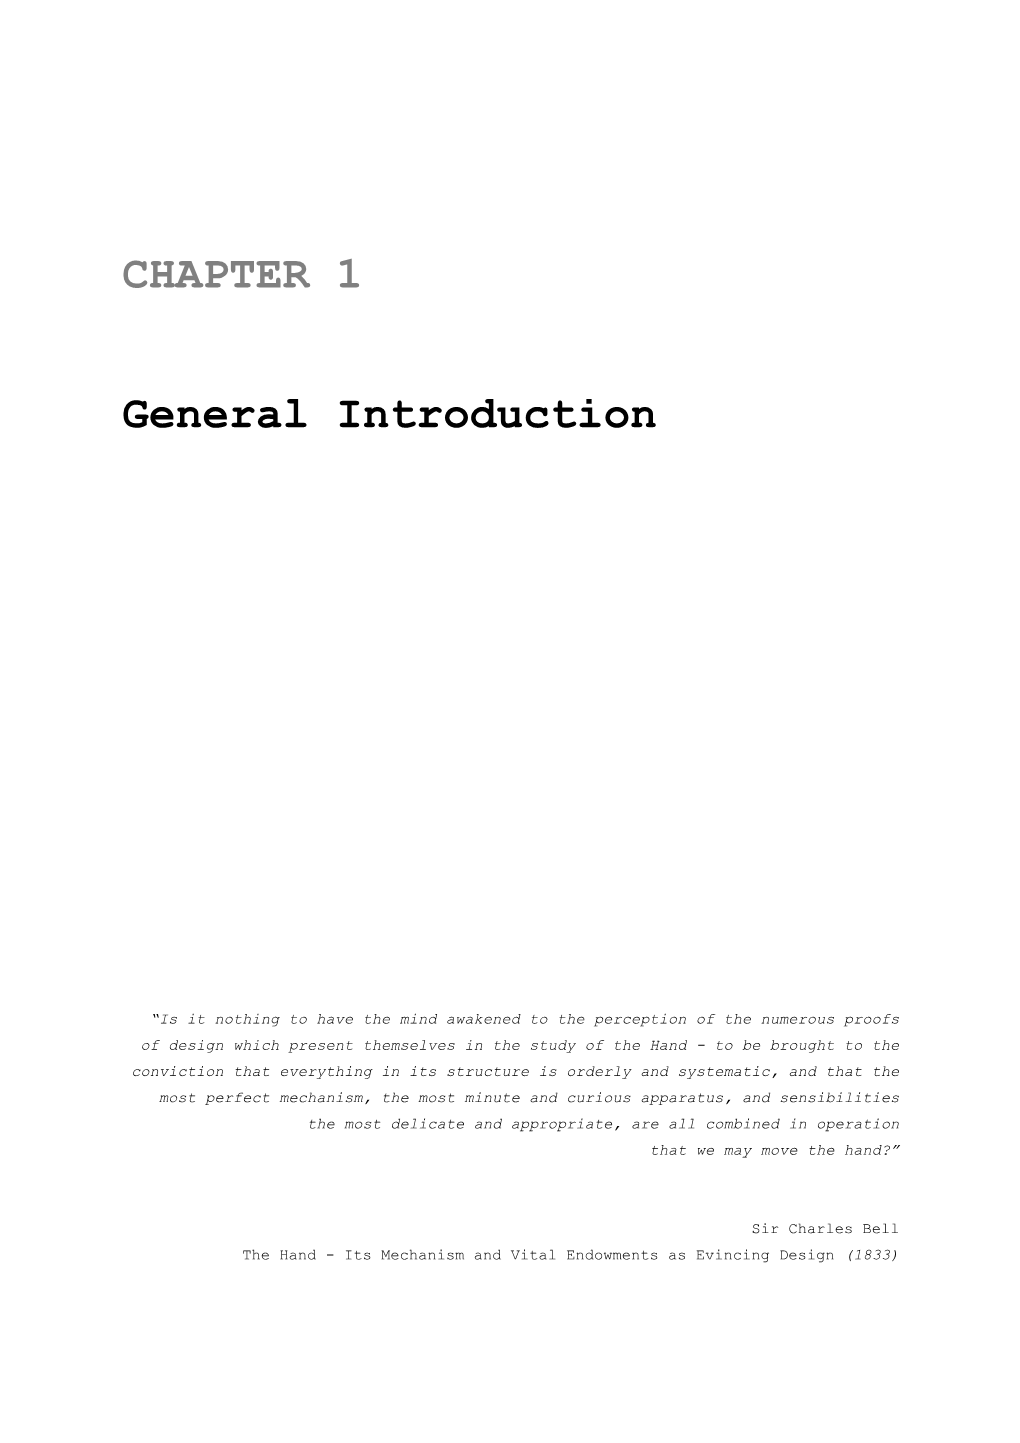 CHAPTER 1 General Introduction